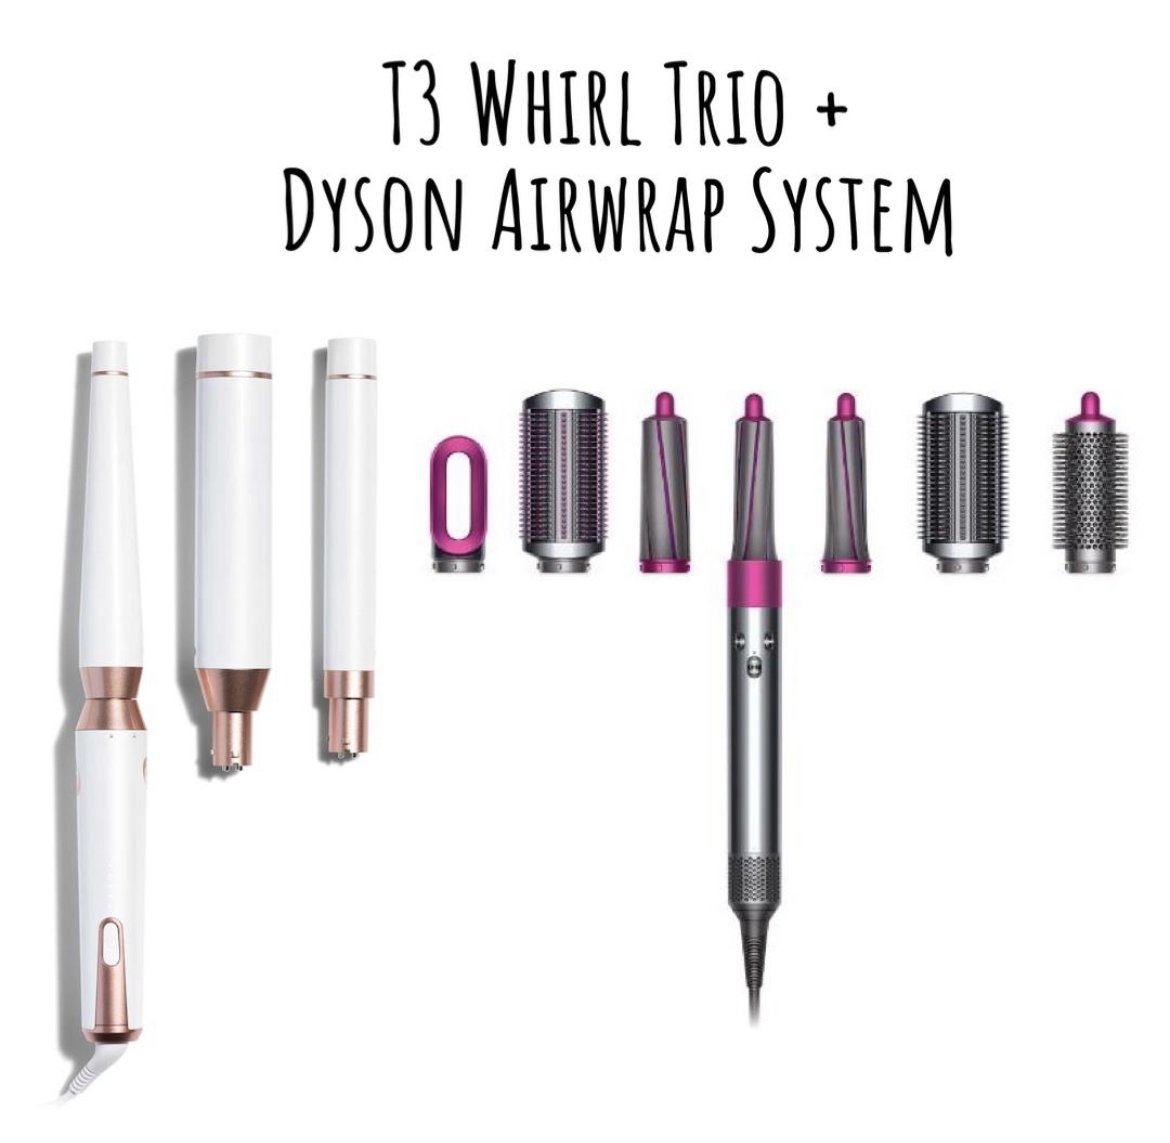 WIN T3 Whirl Trio + Dyson Airwrap System (CASH Option Available) Giveaway